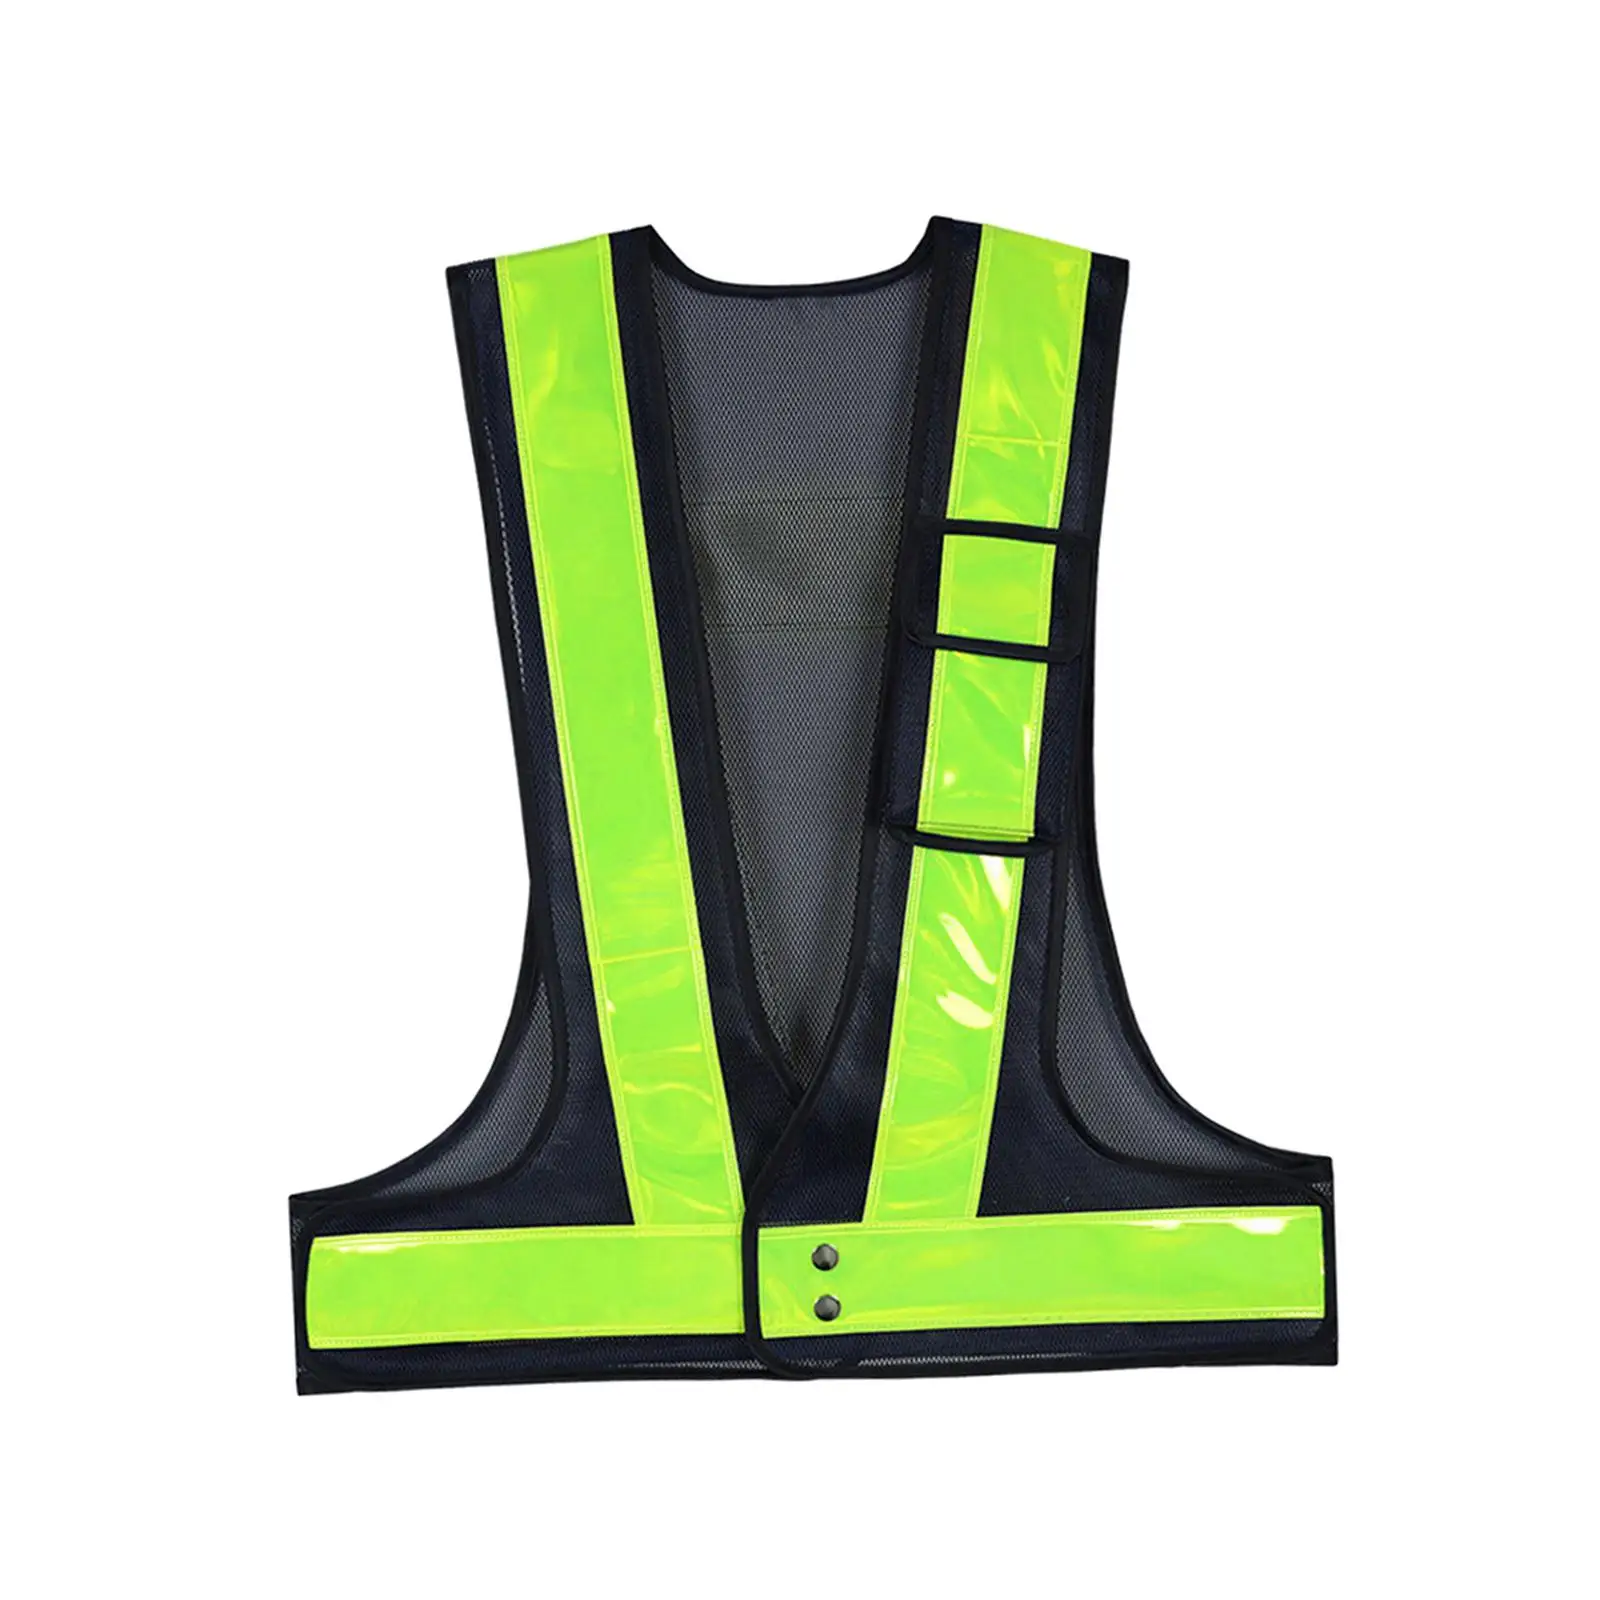 High Visibility Reflective Safety Vest Breathable Reflective Strips for Jogging Worker Construction Crossing Guard Women Men